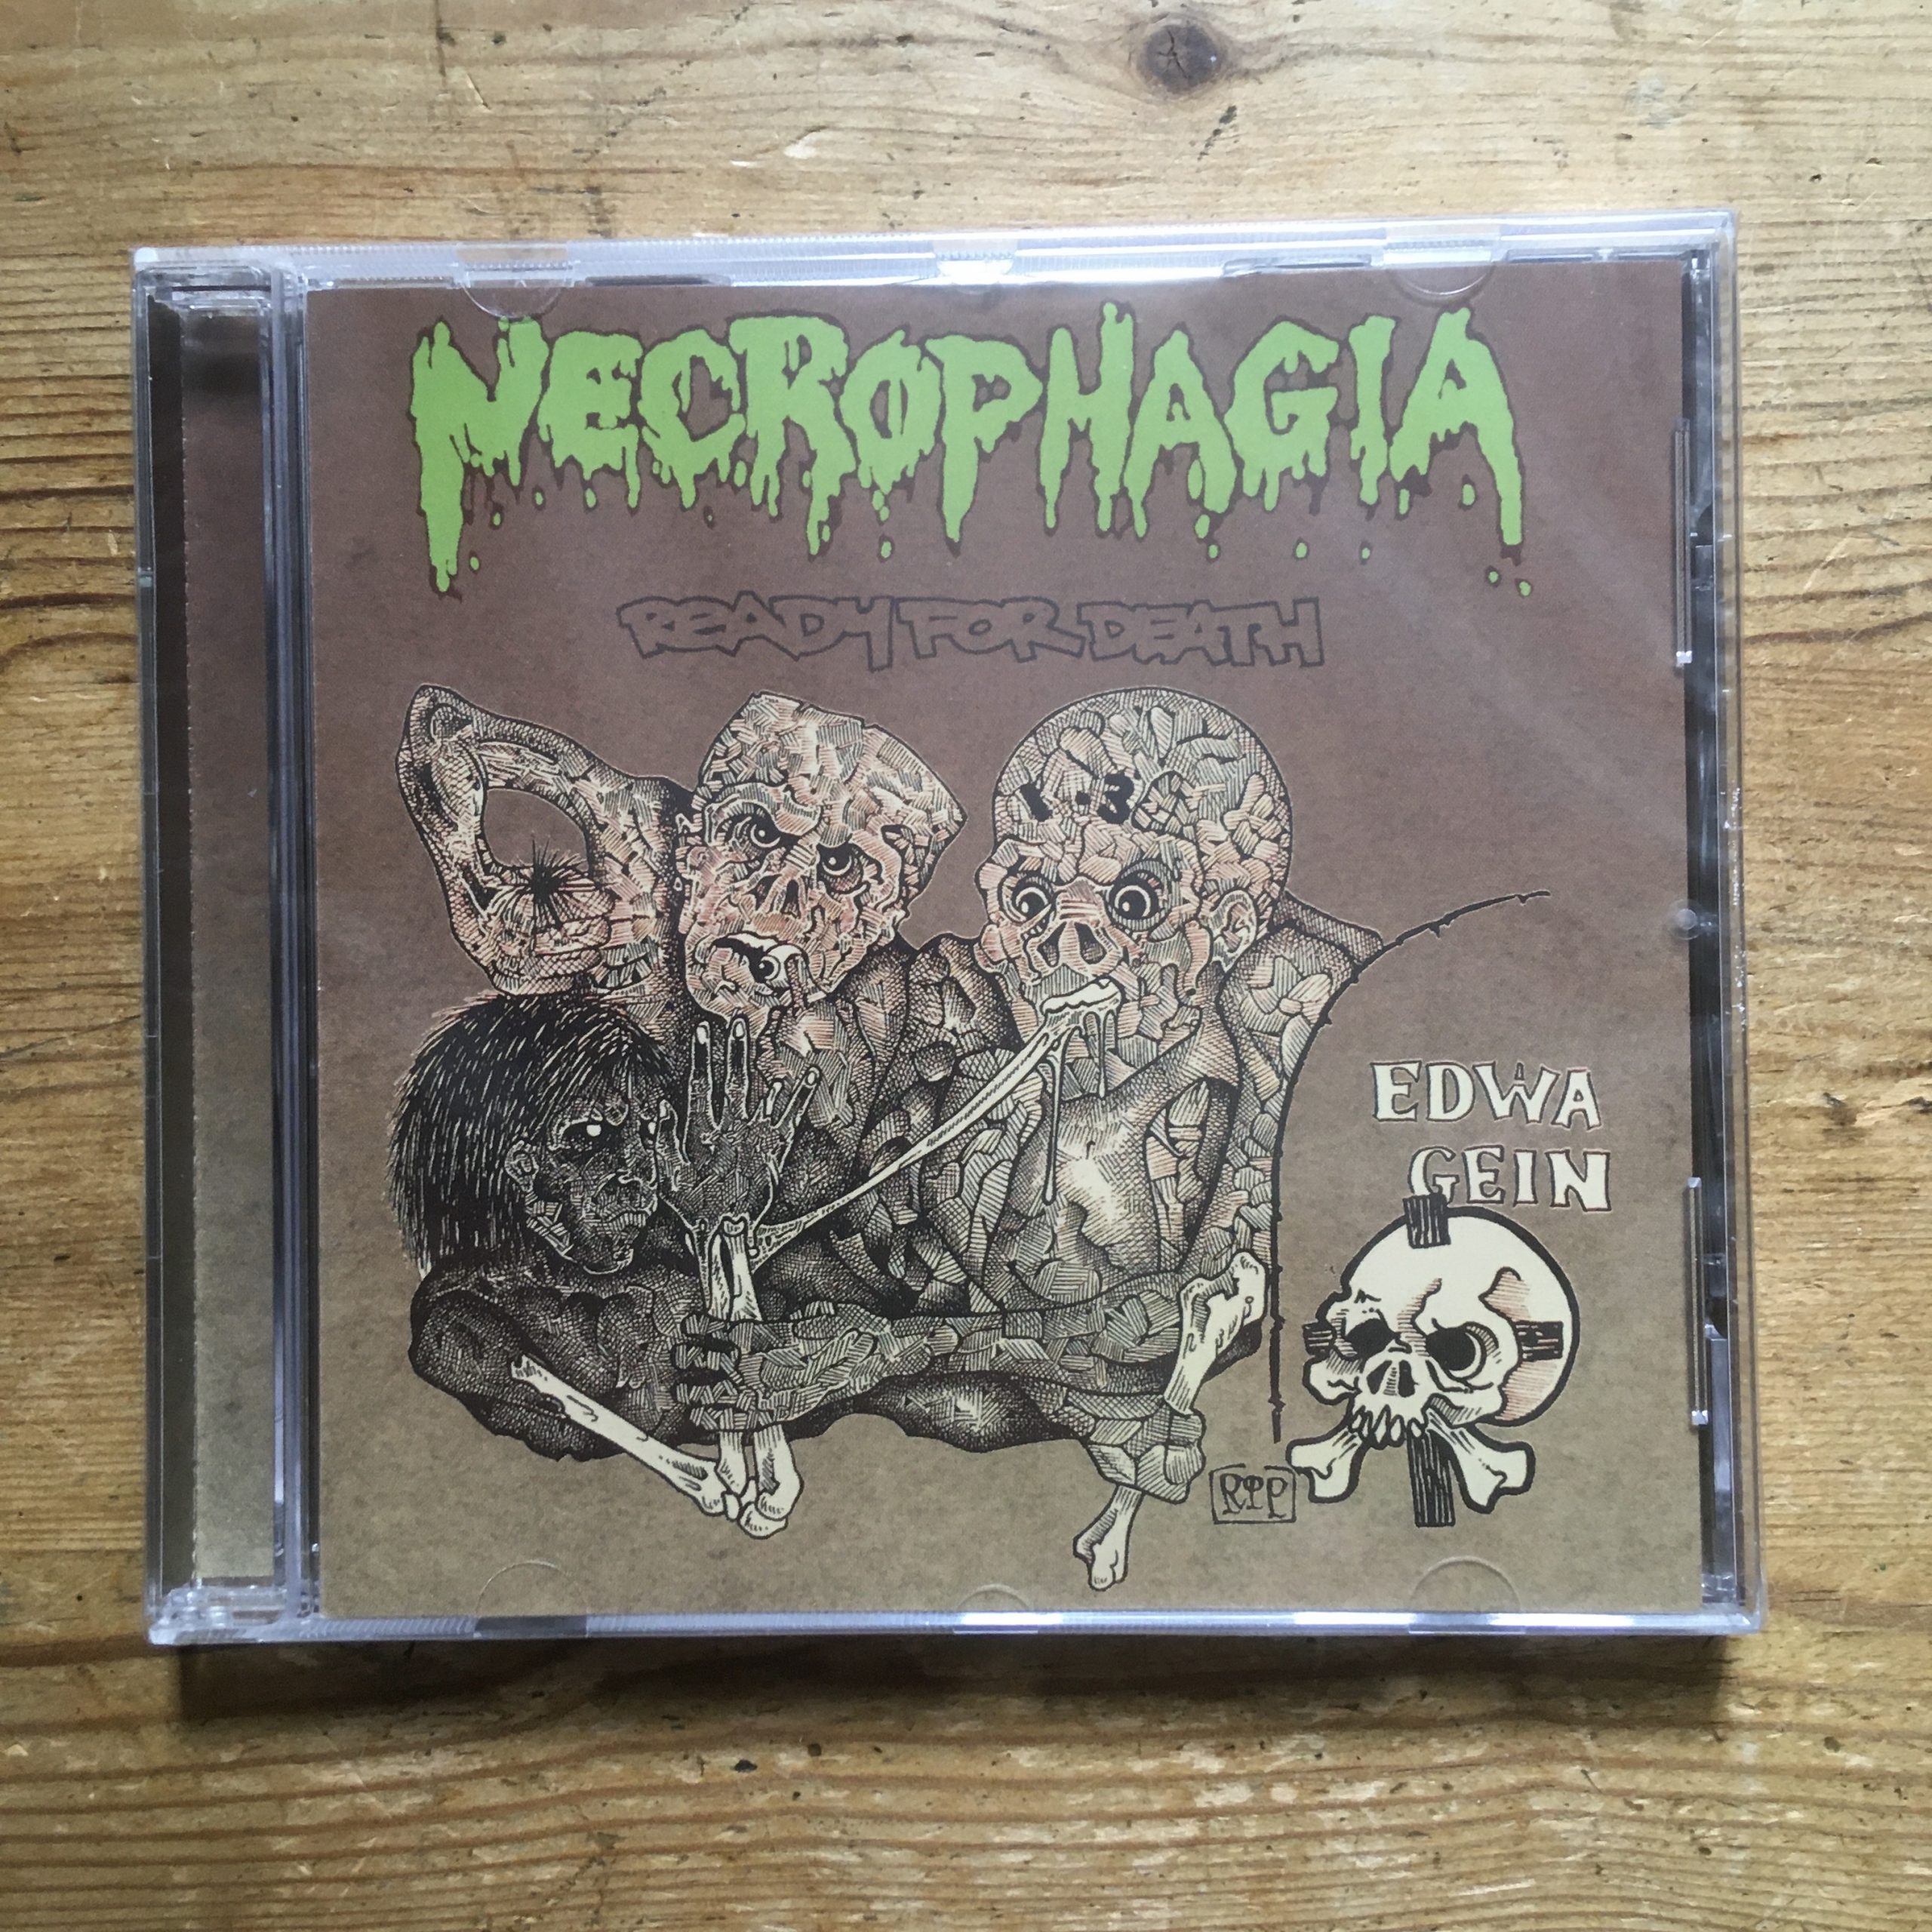 Photo of the Necrophagia - "Ready for Death" CD